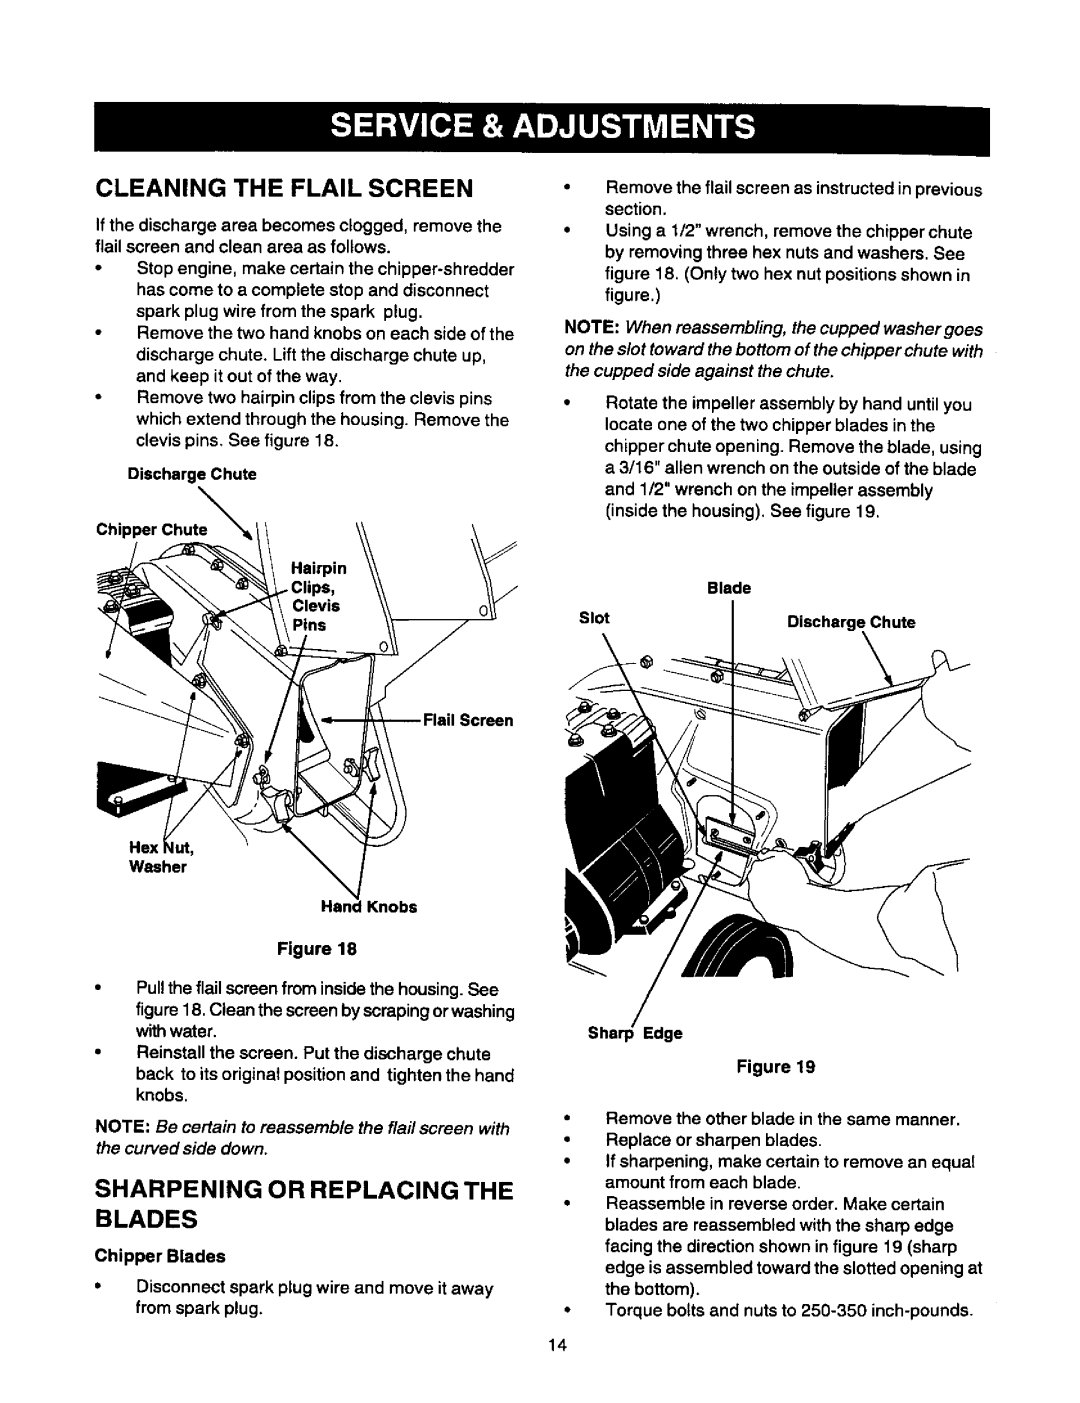 Craftsman 247.775870 owner manual Cleaning The Flail Screen, Sharpening Or Replacing The Blades 